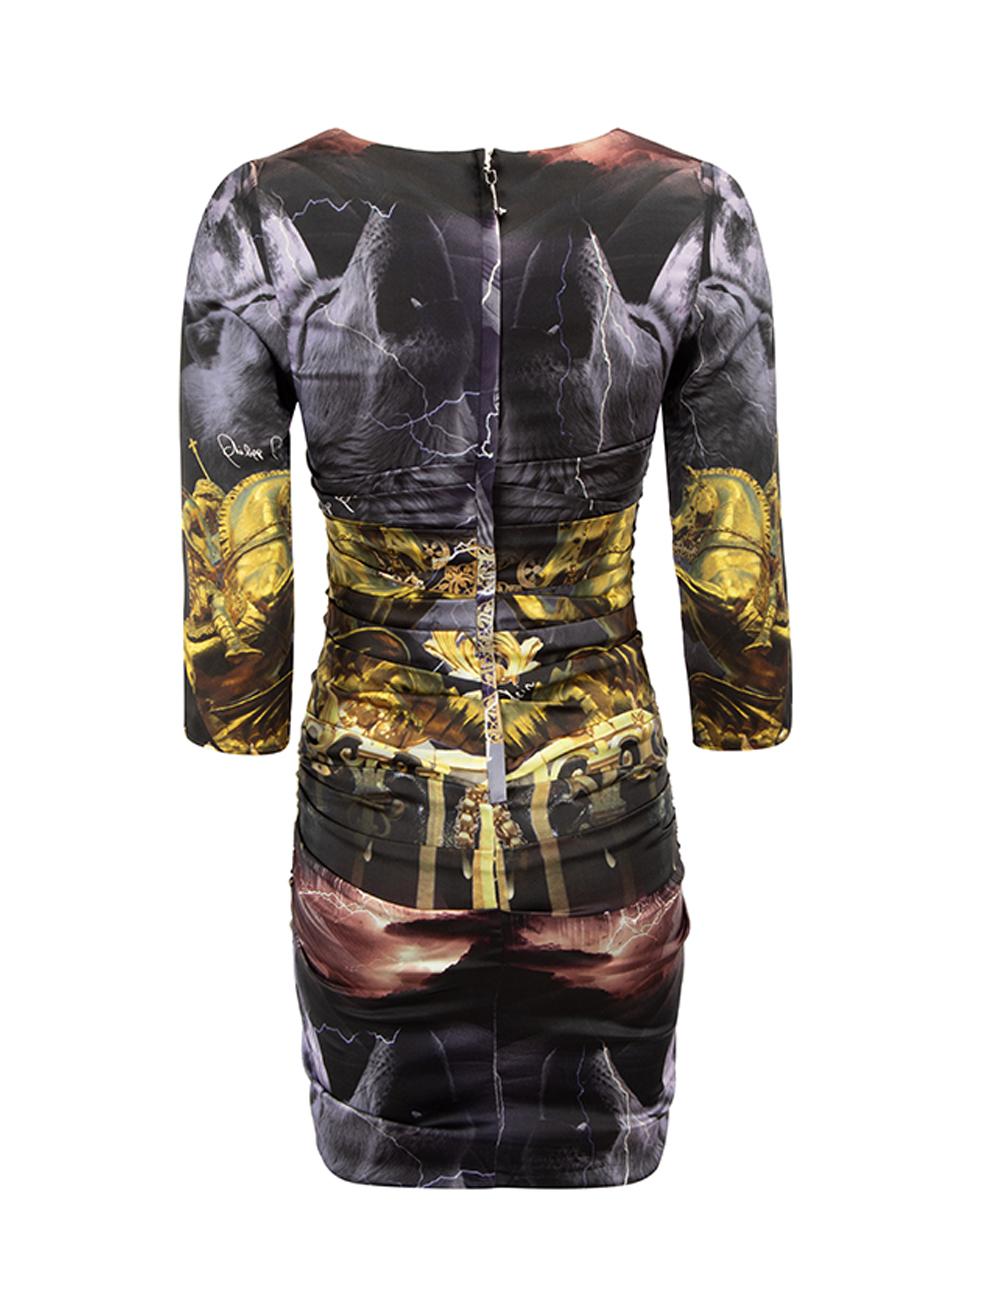 Philipp Plein Women's Graphic Printed Ruched Mini Dress In Good Condition For Sale In London, GB